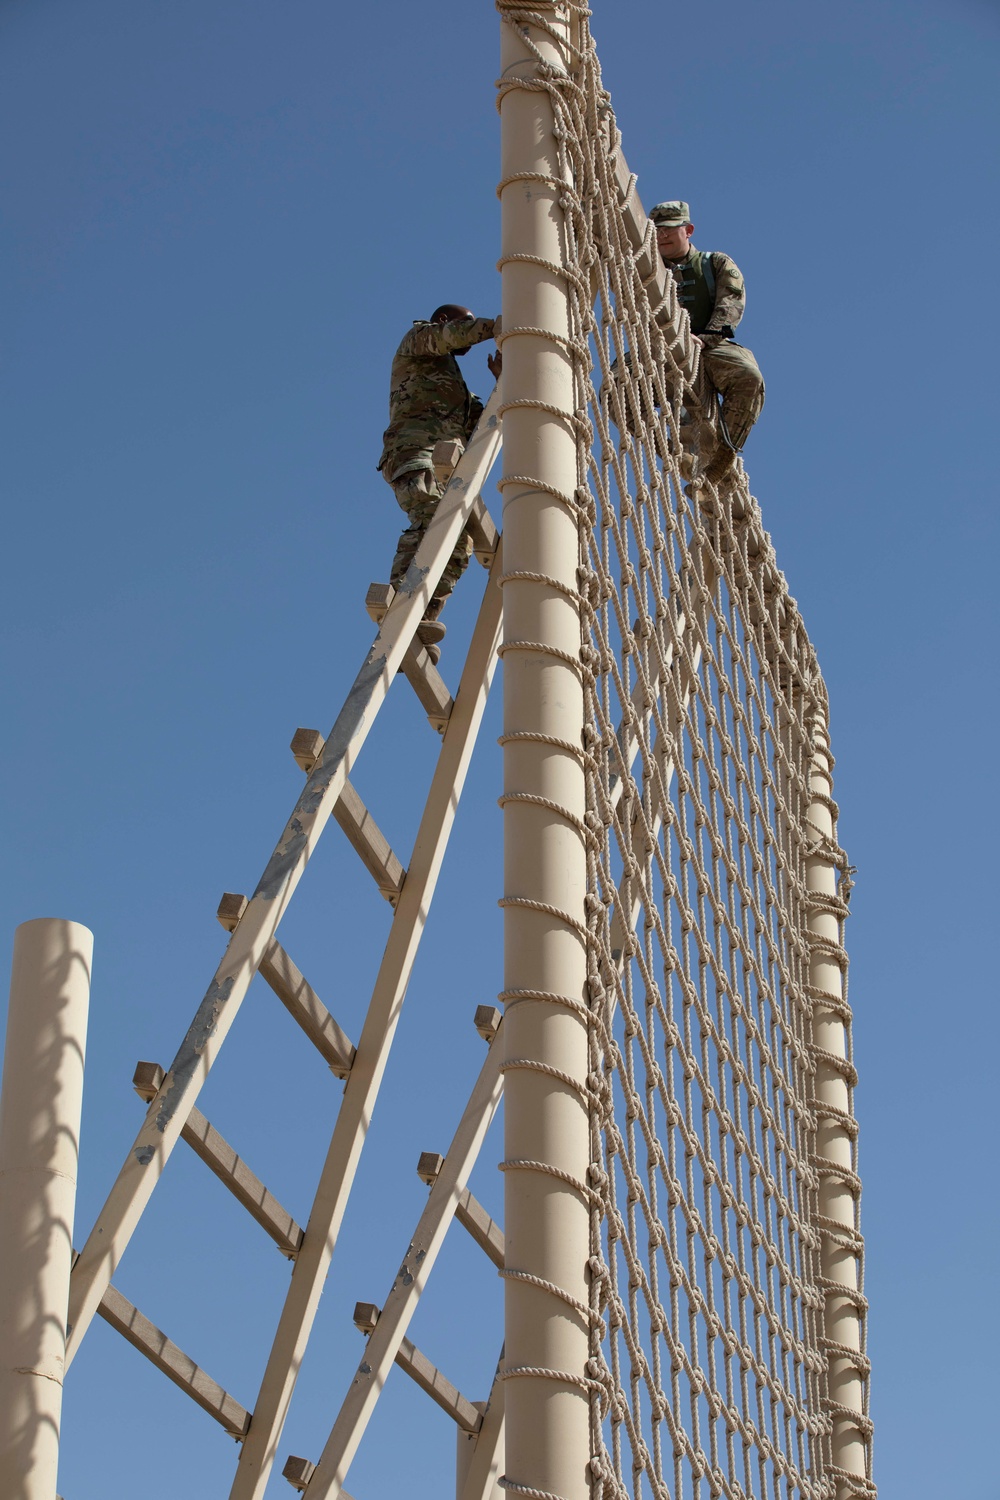 U.S. Army Central 2021 Best Warrior Competition obstacle course event